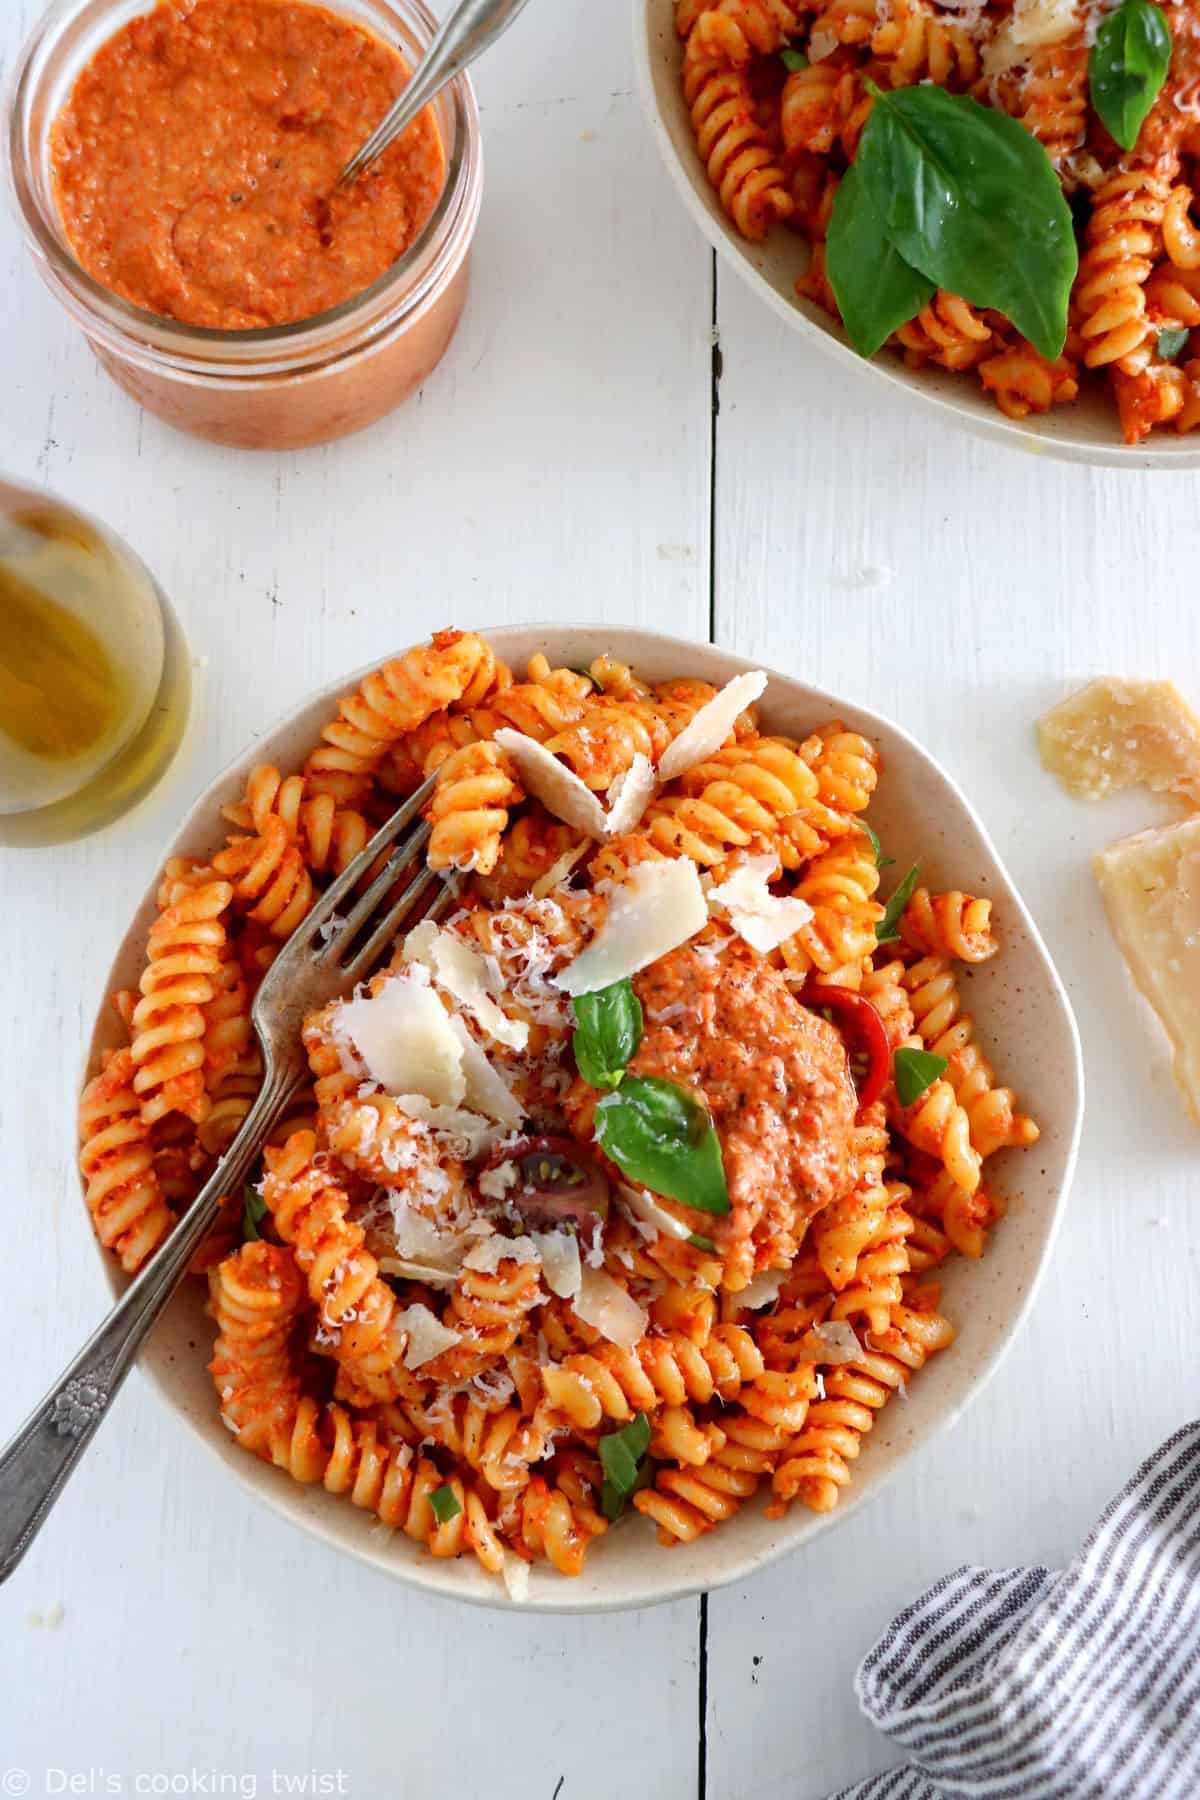 This roasted red pepper and cashew pesto pasta is made with a thick, creamy sauce, and has rich nutty-sweet and smoky flavors.